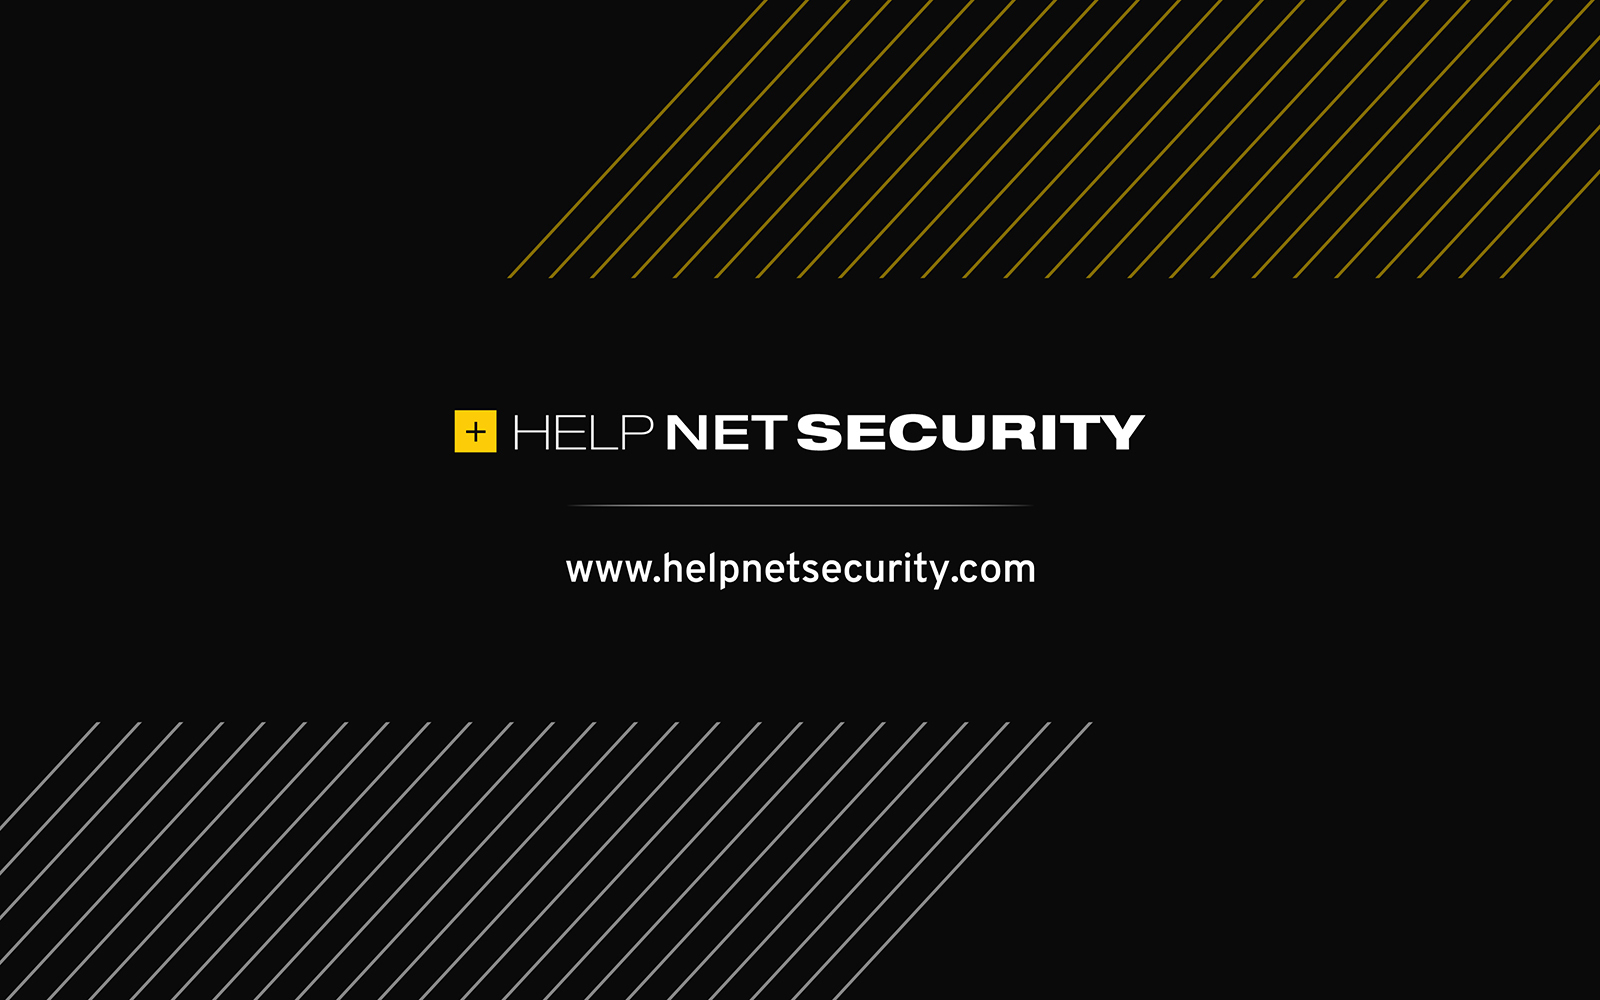 Stellar Cyber partners with BlackBerry to help users detect and respond to cyber threats - Help Net Security